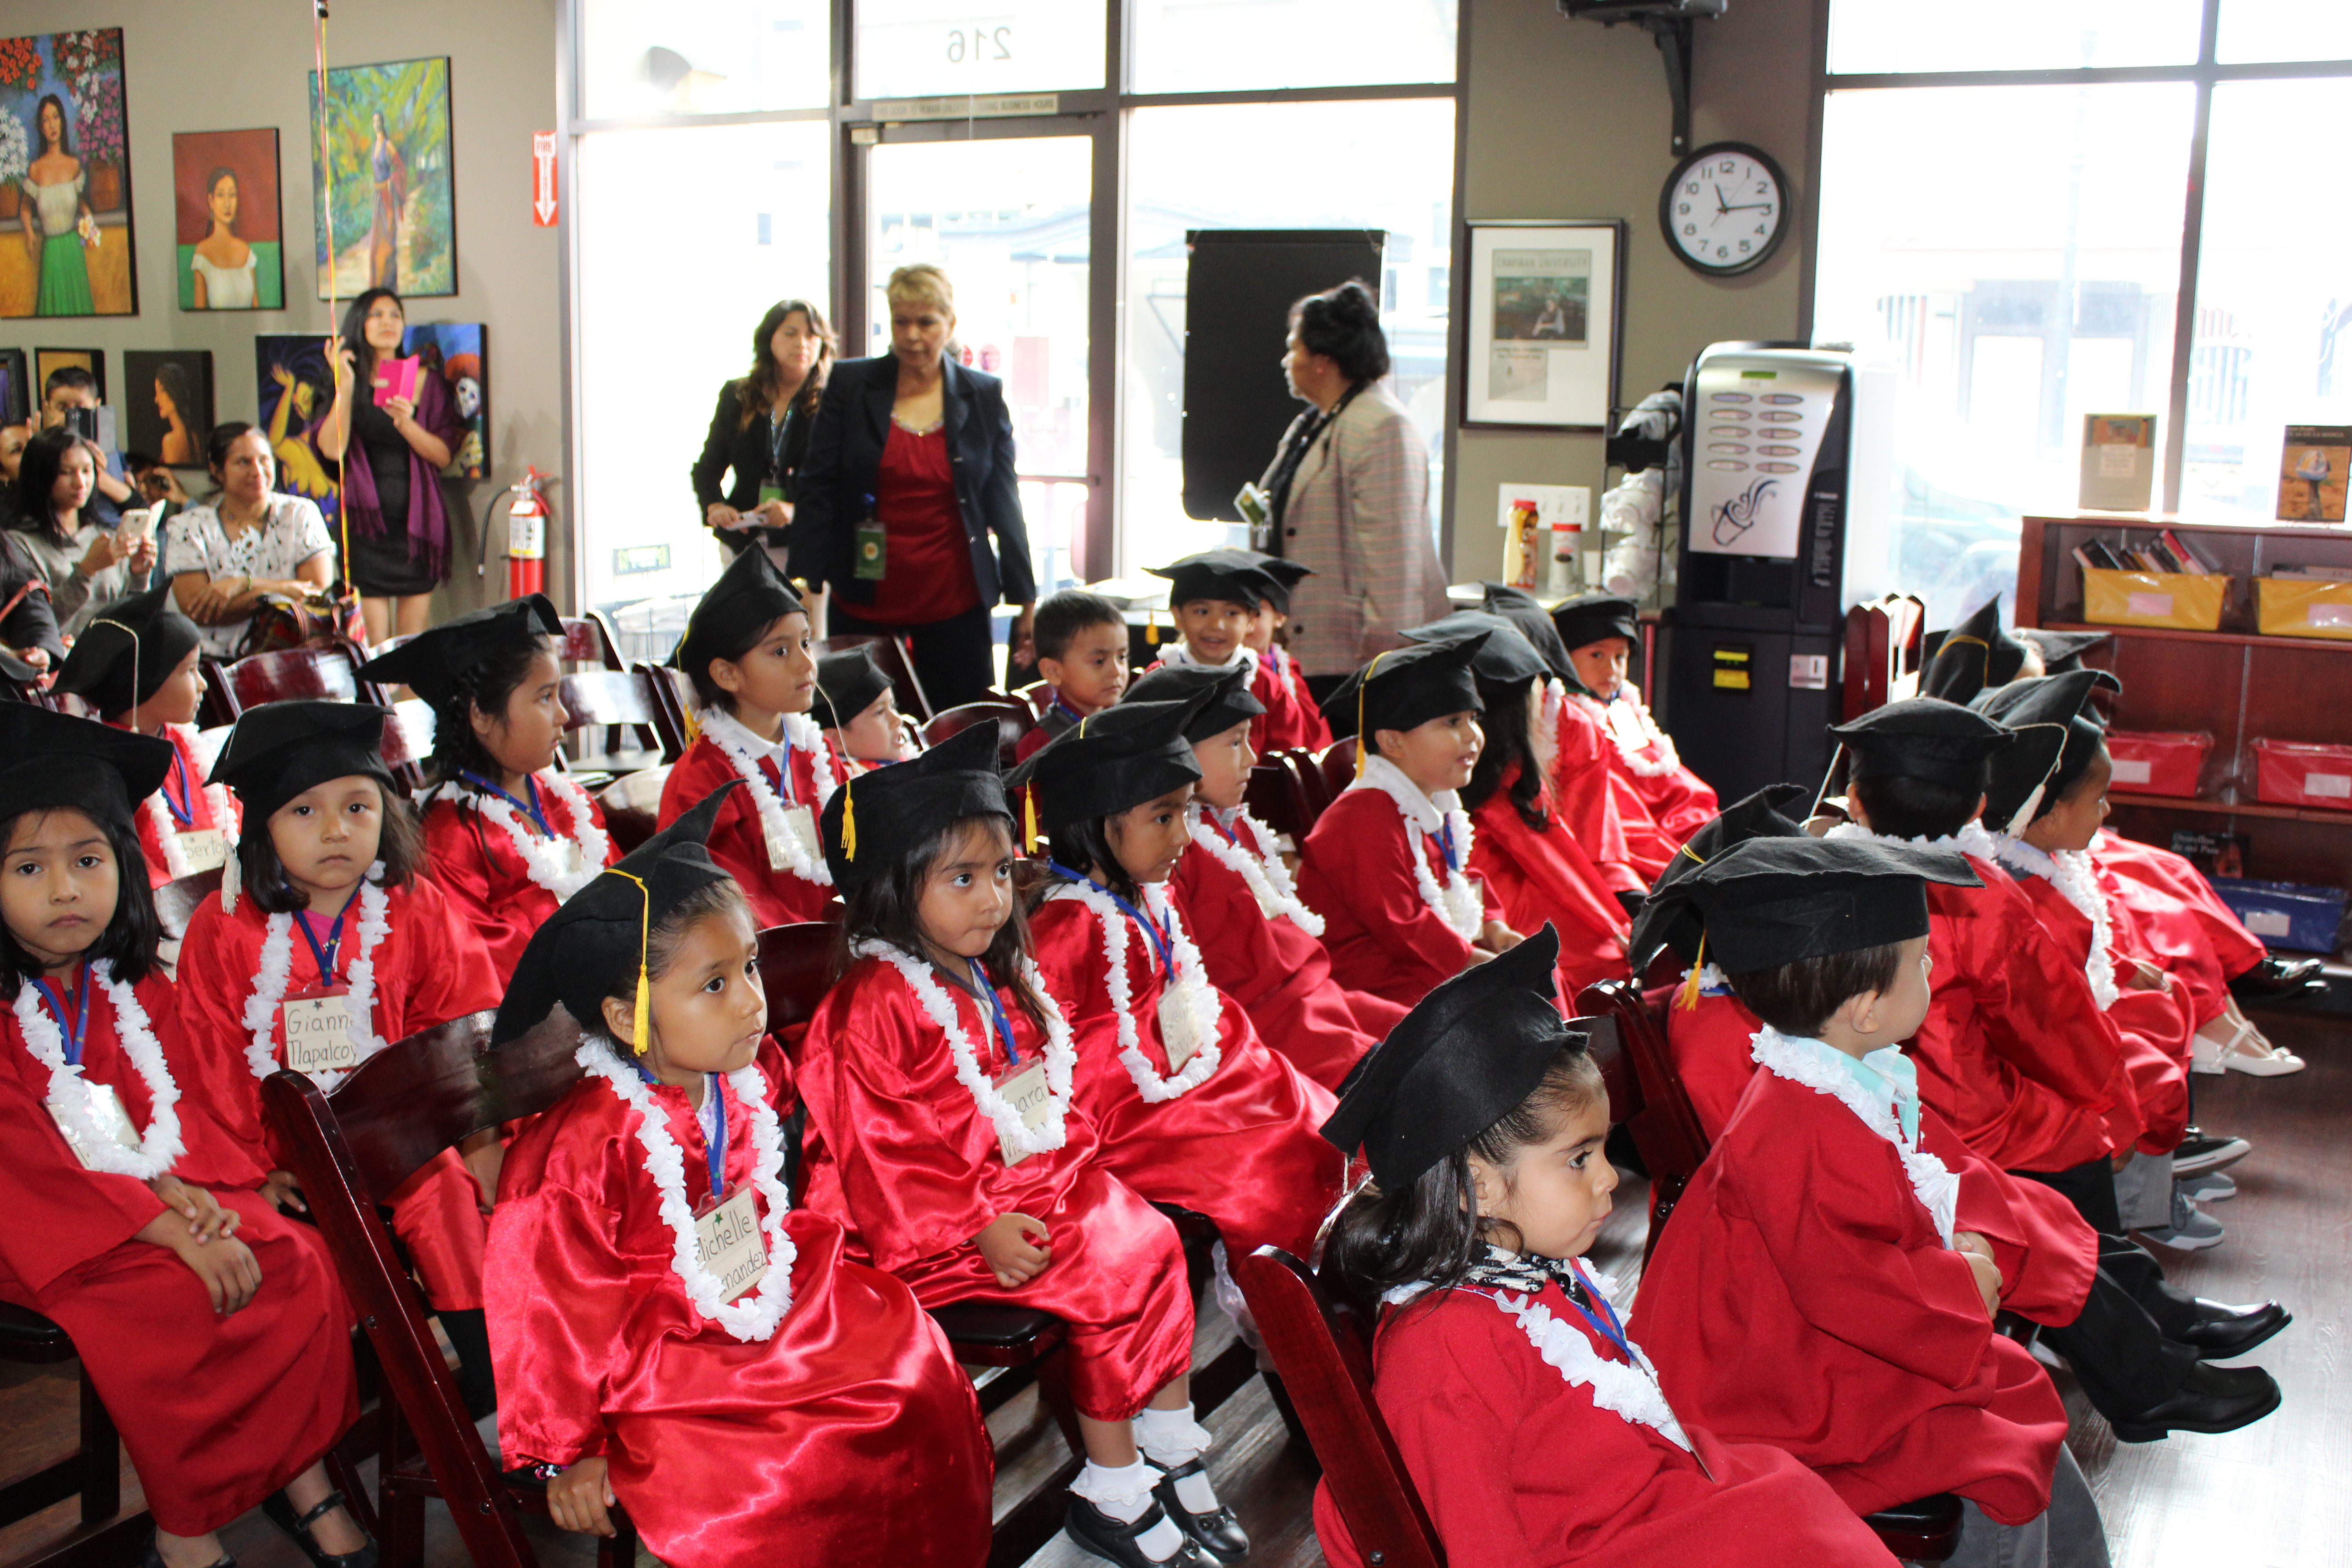 group of young children graduating.